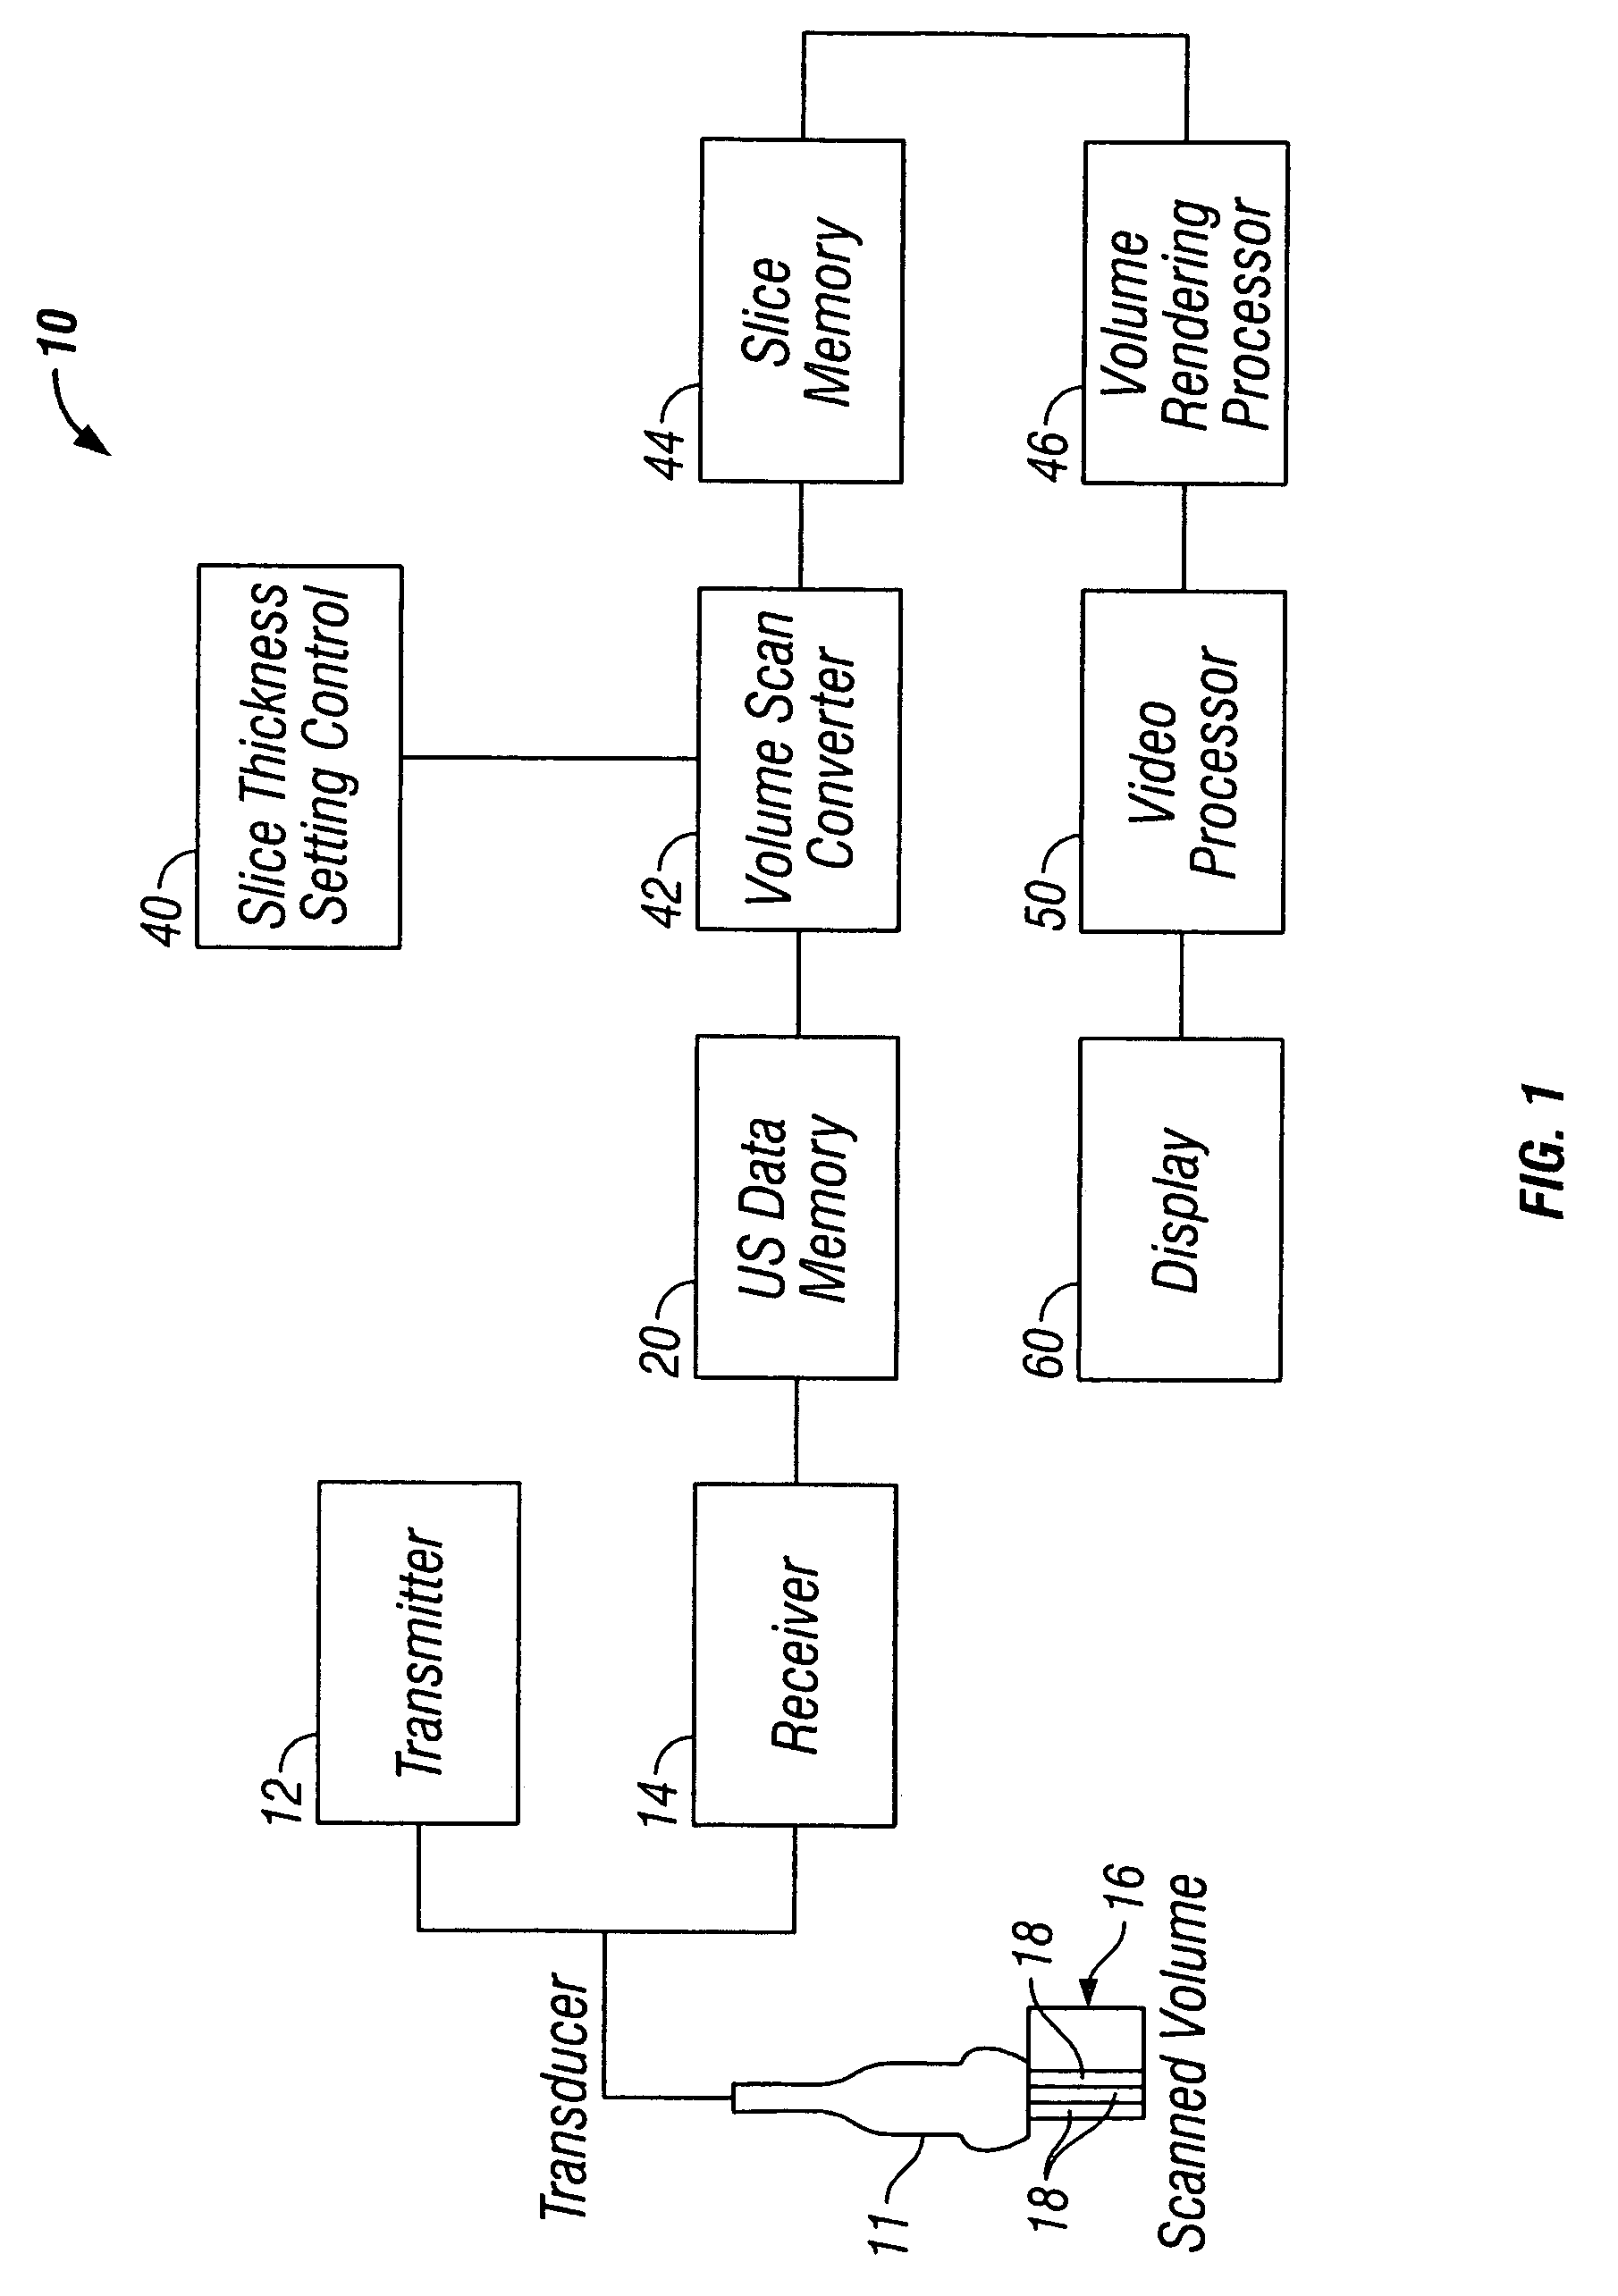 Method and apparatus for controlling ultrasound systems